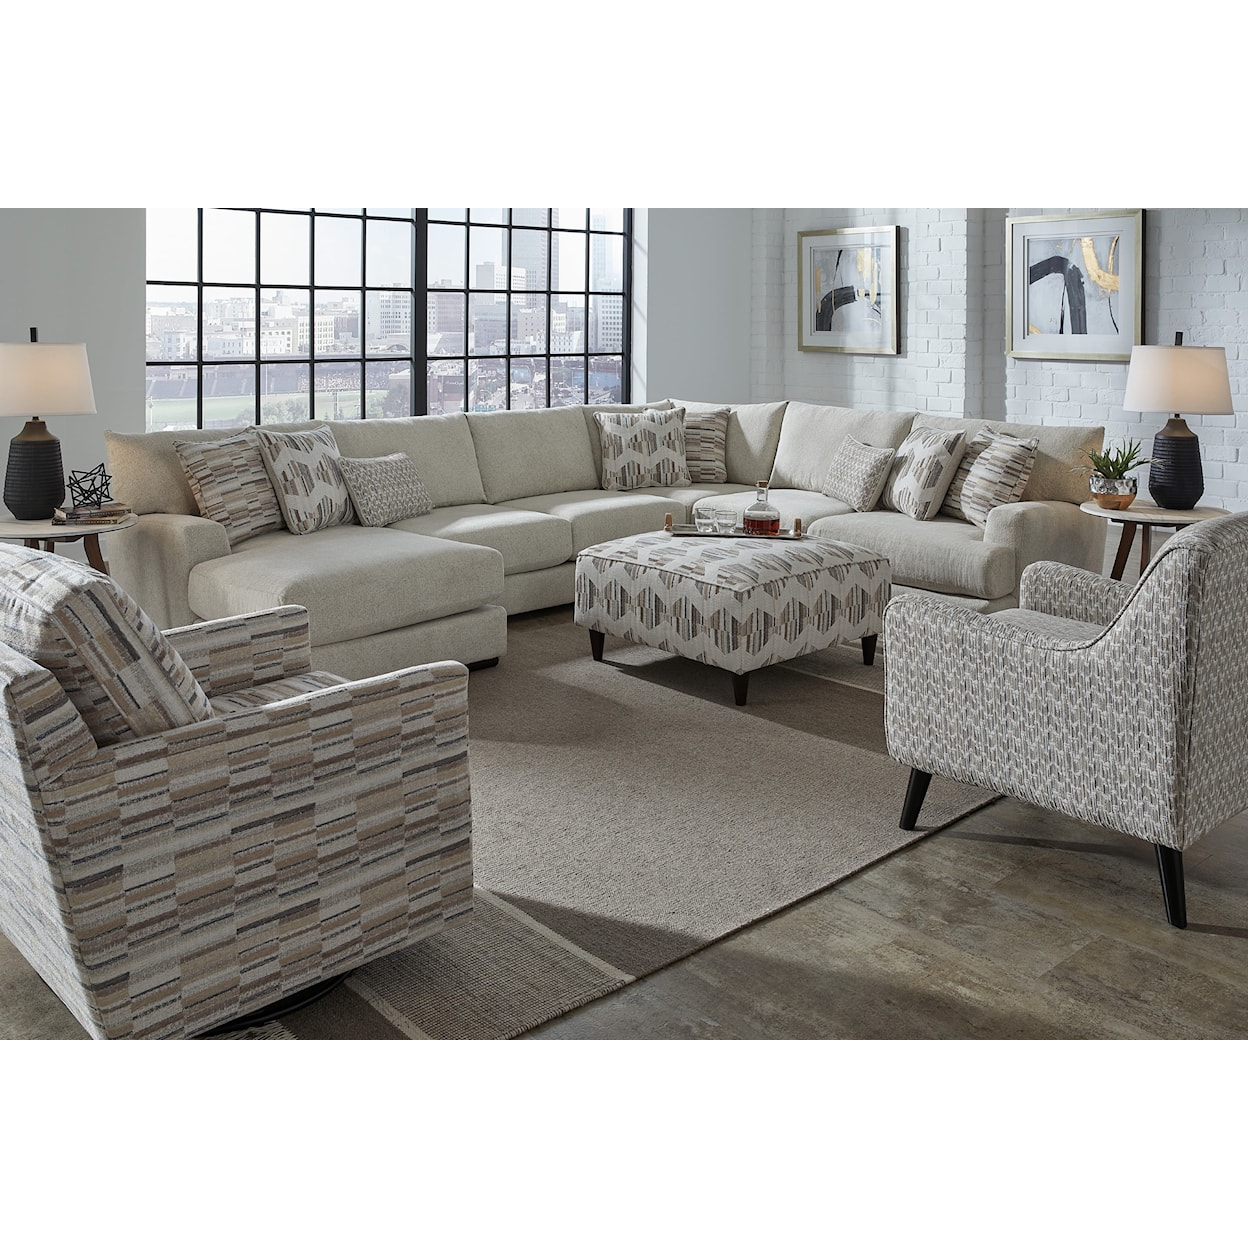 Fusion Furniture 51 MARE IVORY 4-Piece Sectional with Left Chaise